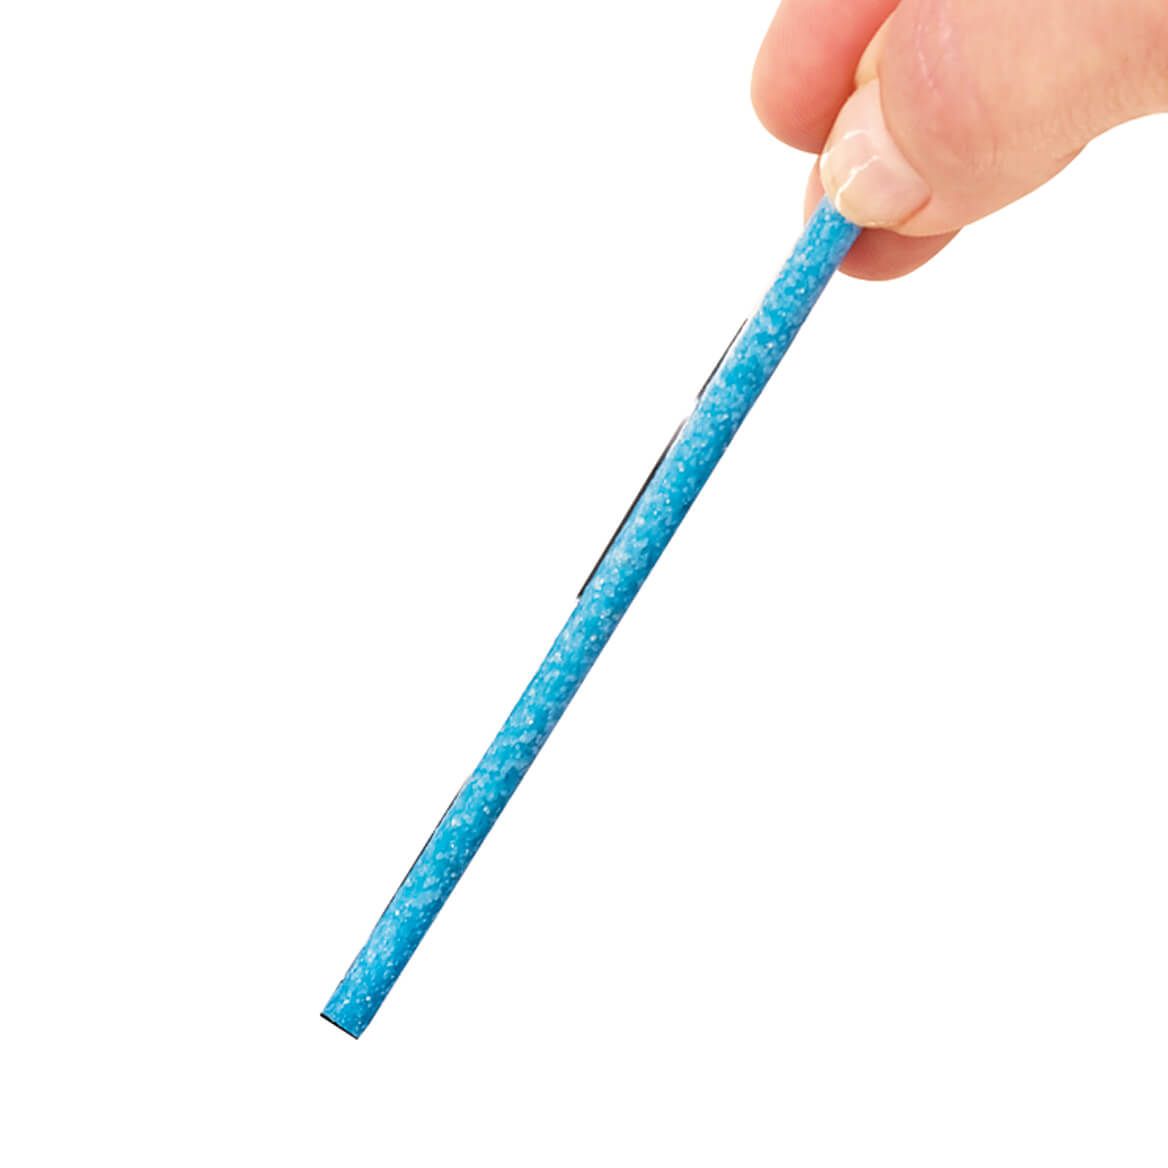 Drain Cleaning Sticks Set of 24 + '-' + 351404